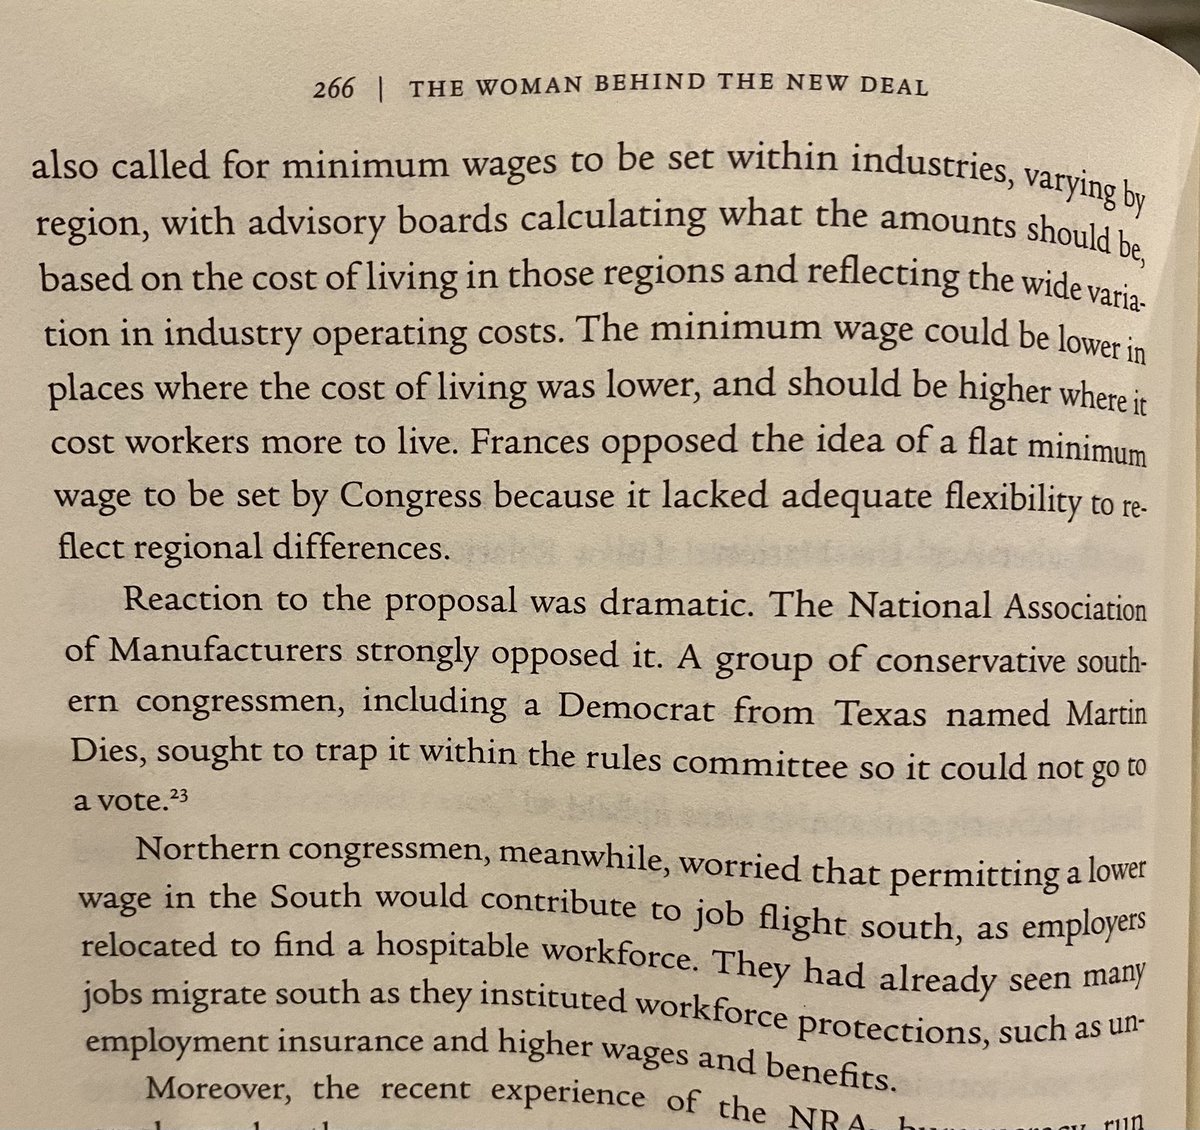 Frances Perkins’ original proposal that FDR brought to Congress allowed for regions / industries to have different minimums based on local cost of living ... it met fierce opposition from businesses in South and North